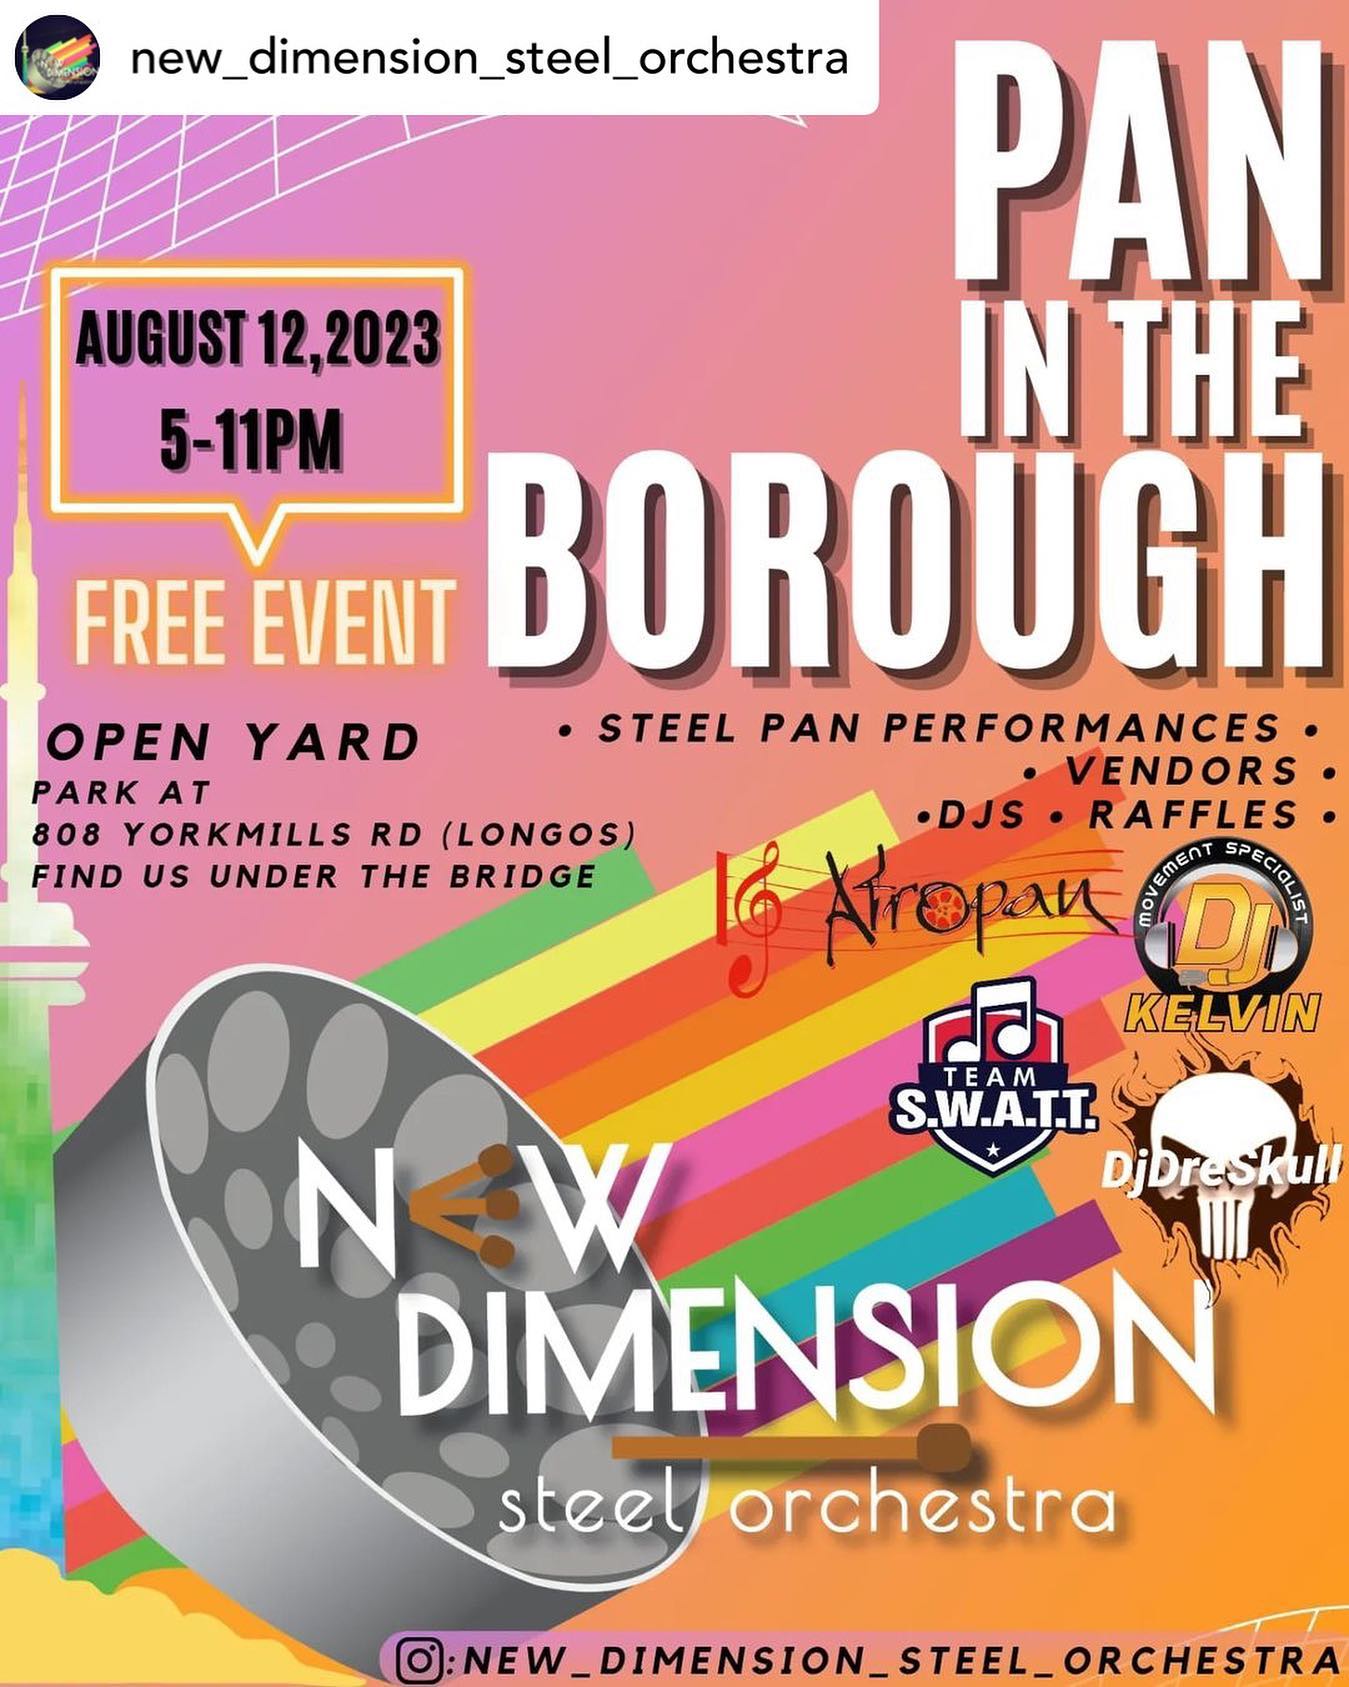 We're back for the last PITB of the season 🏾.

Join us and shop with local vendors, listen to local DJs and hear sweet steelpan.

Featuring us, New Dimension Steel Orchestra and special guest @afropansteelband , this will be an evening to remember!

Bring your coolers and come out this Saturday August 12 from 5-11pm.

All your donations and sales proceeds go back into funding the band 🏾

•